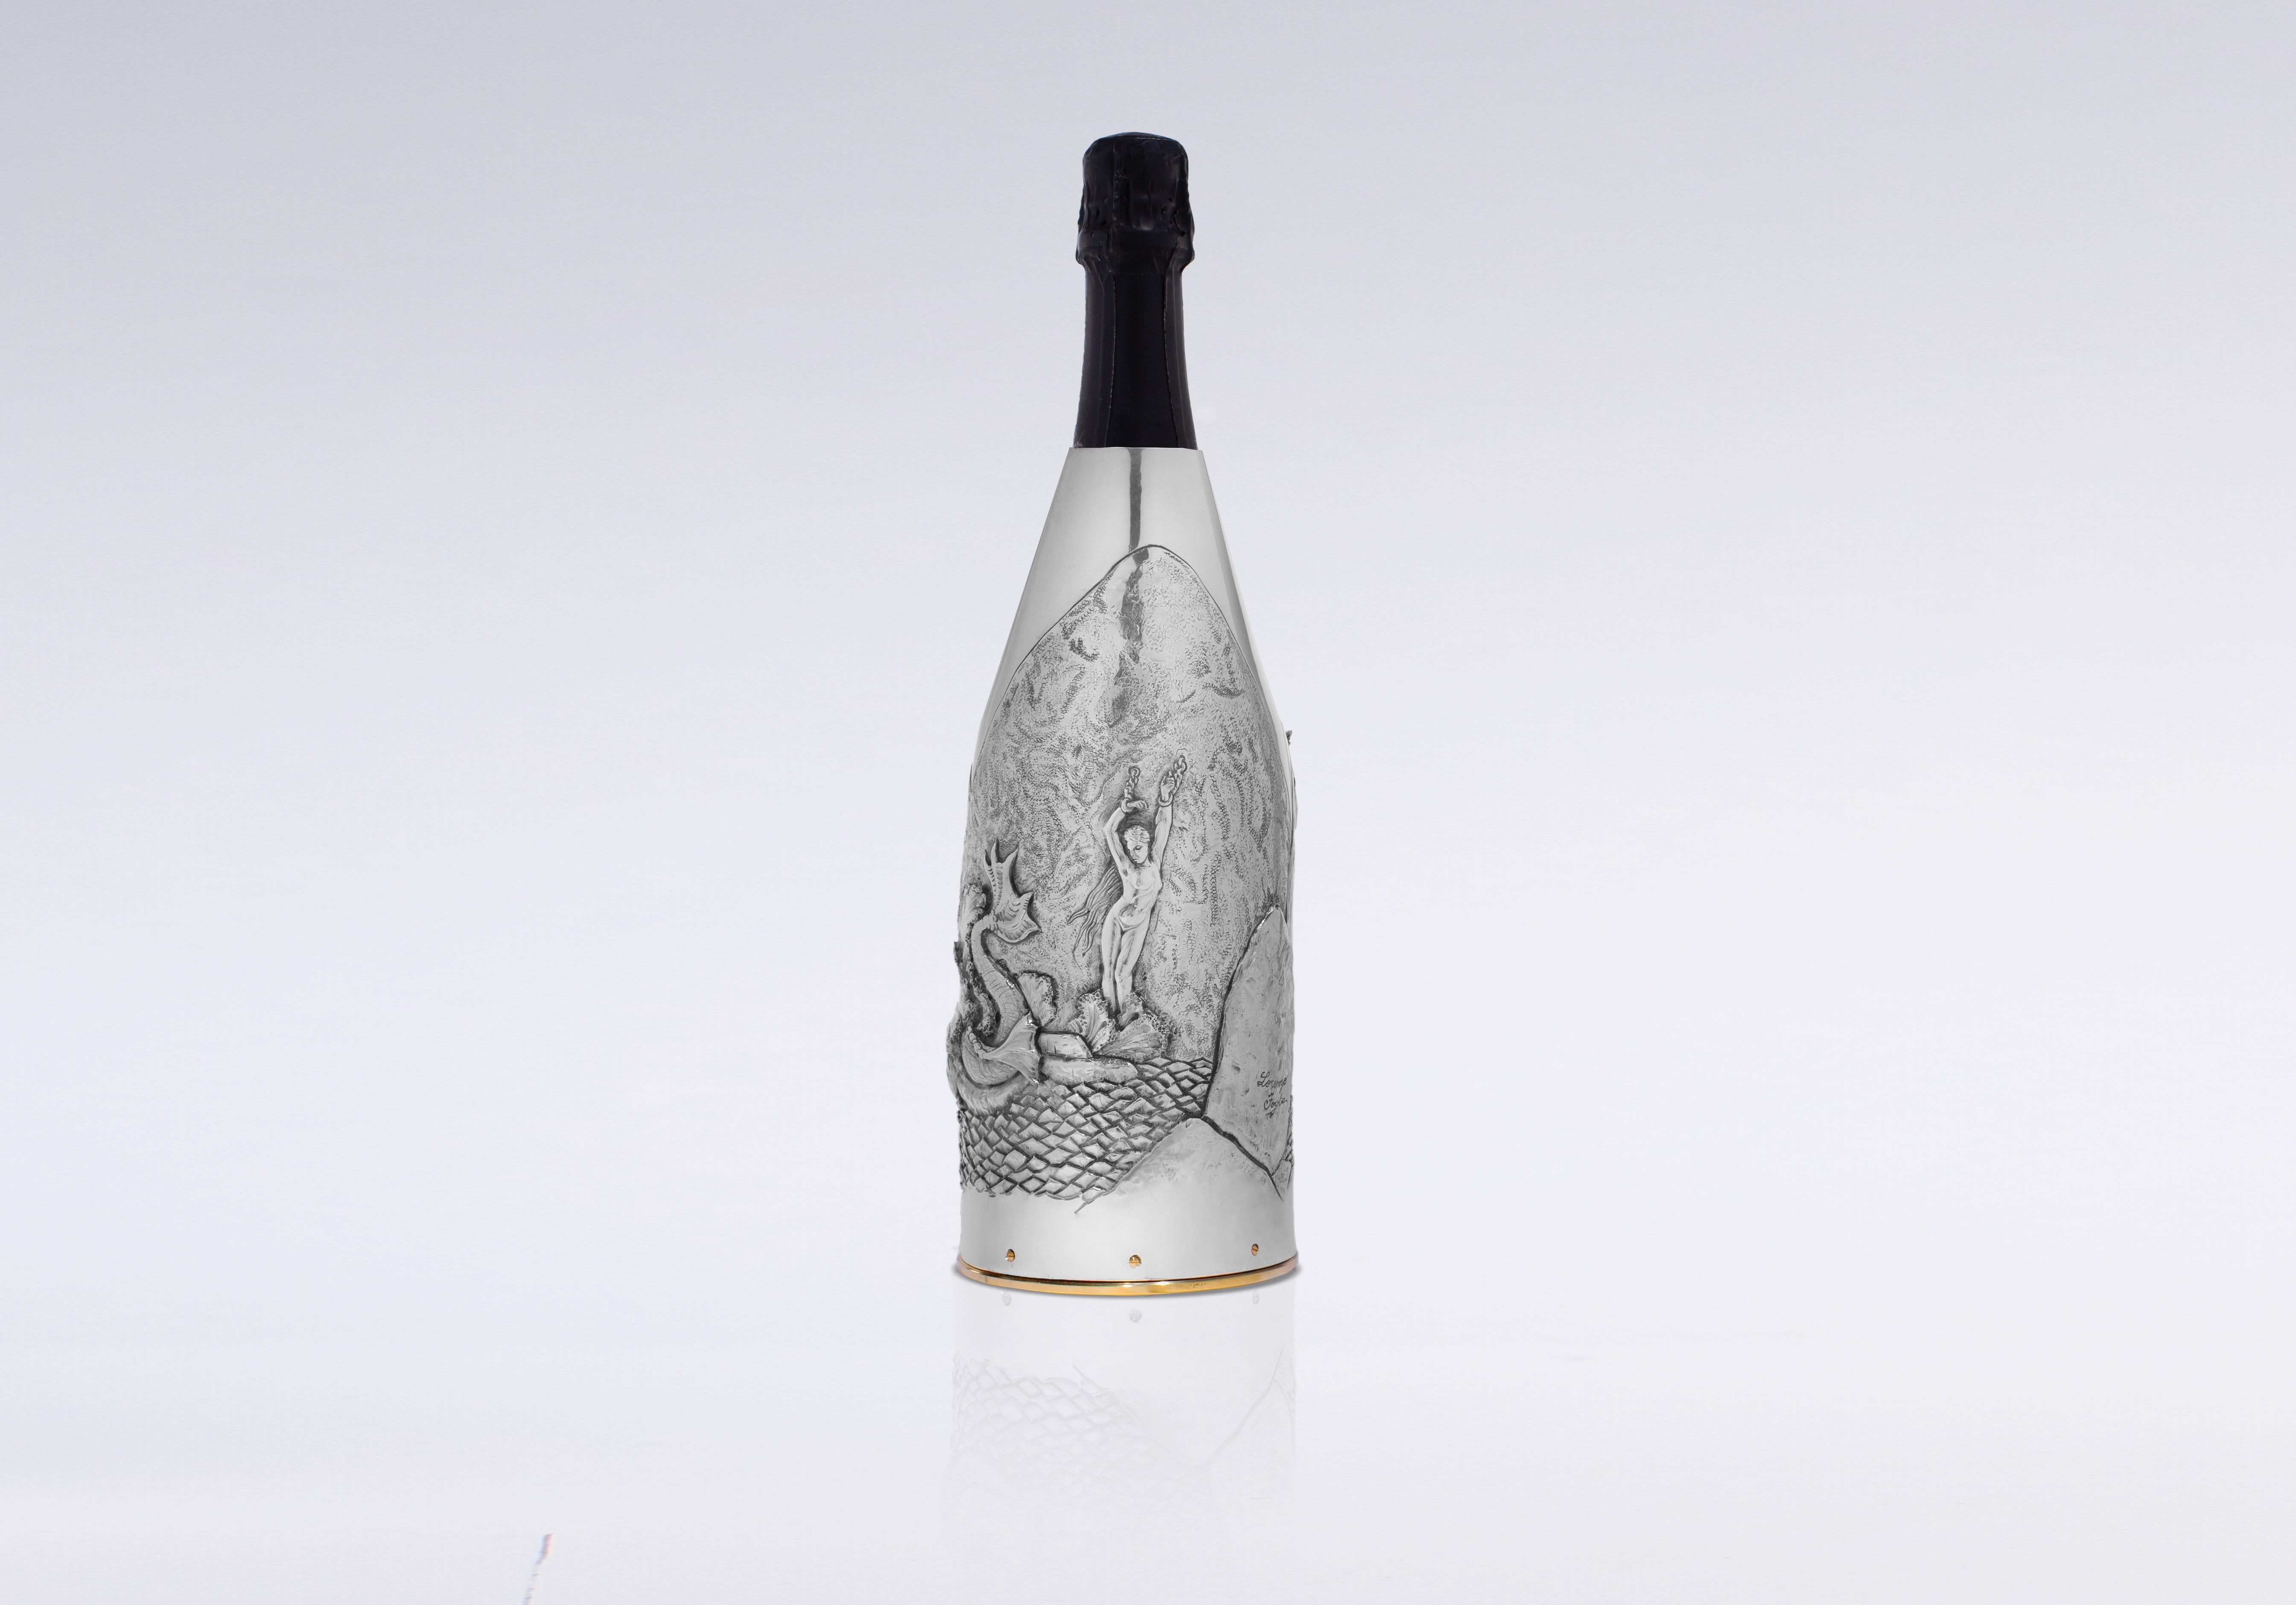 This champagne cover is a remarkable addition to our K-OVER Art collection.

Crafted from pure silver 999/°°, the artist skillfully depicted a scene from the epic poem “Orlando Furioso” by Ariosto. The cover portrays the captivating moment when